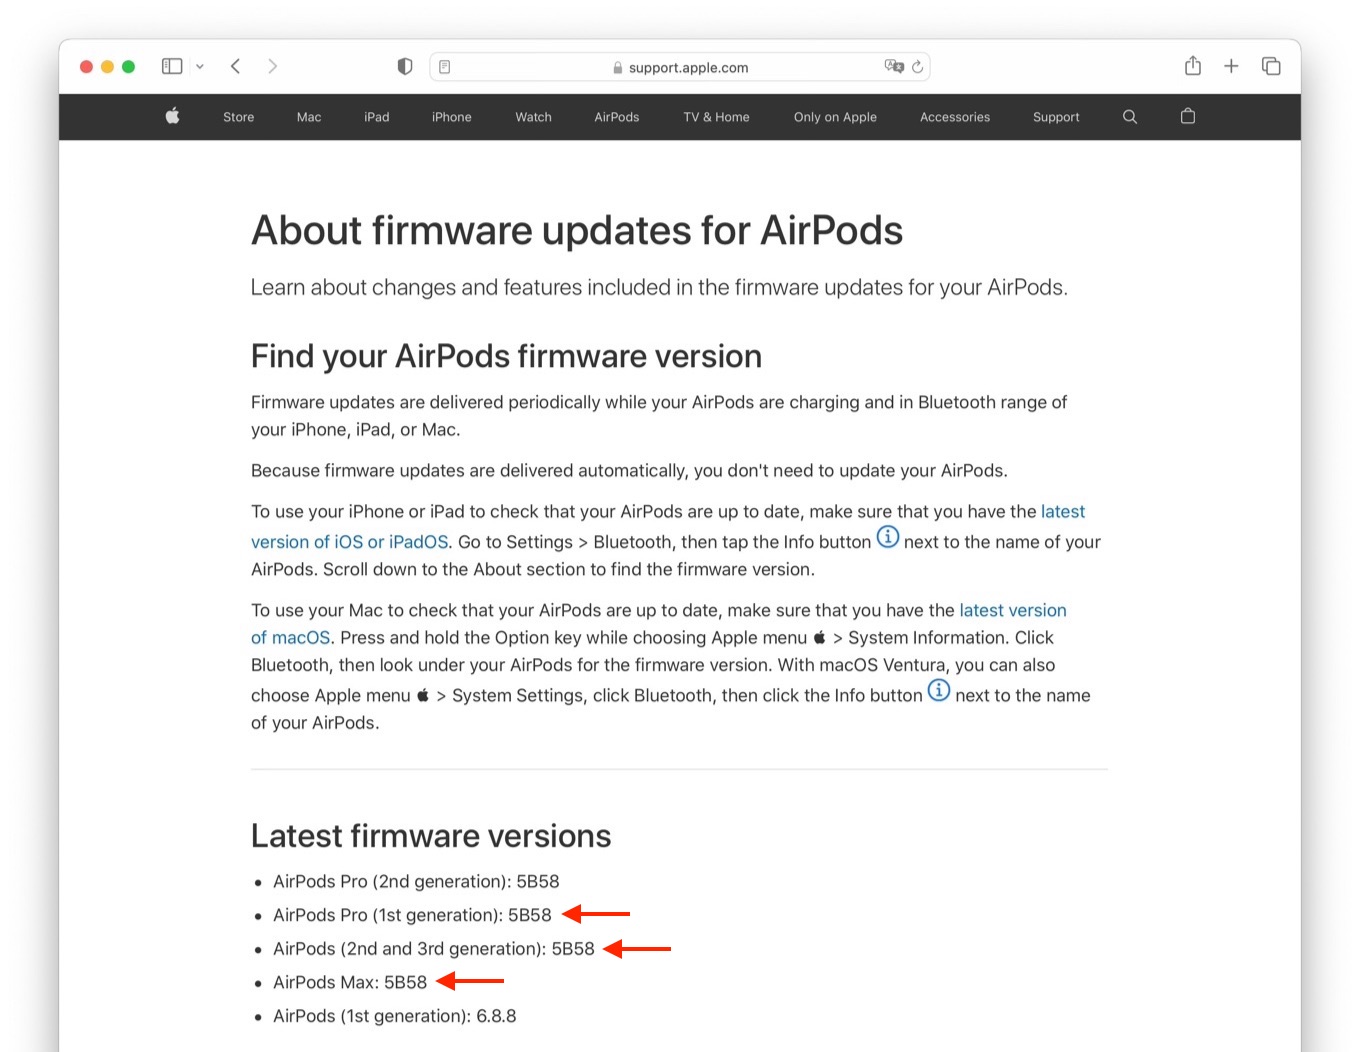 About 5B58 firmware updates for AirPods